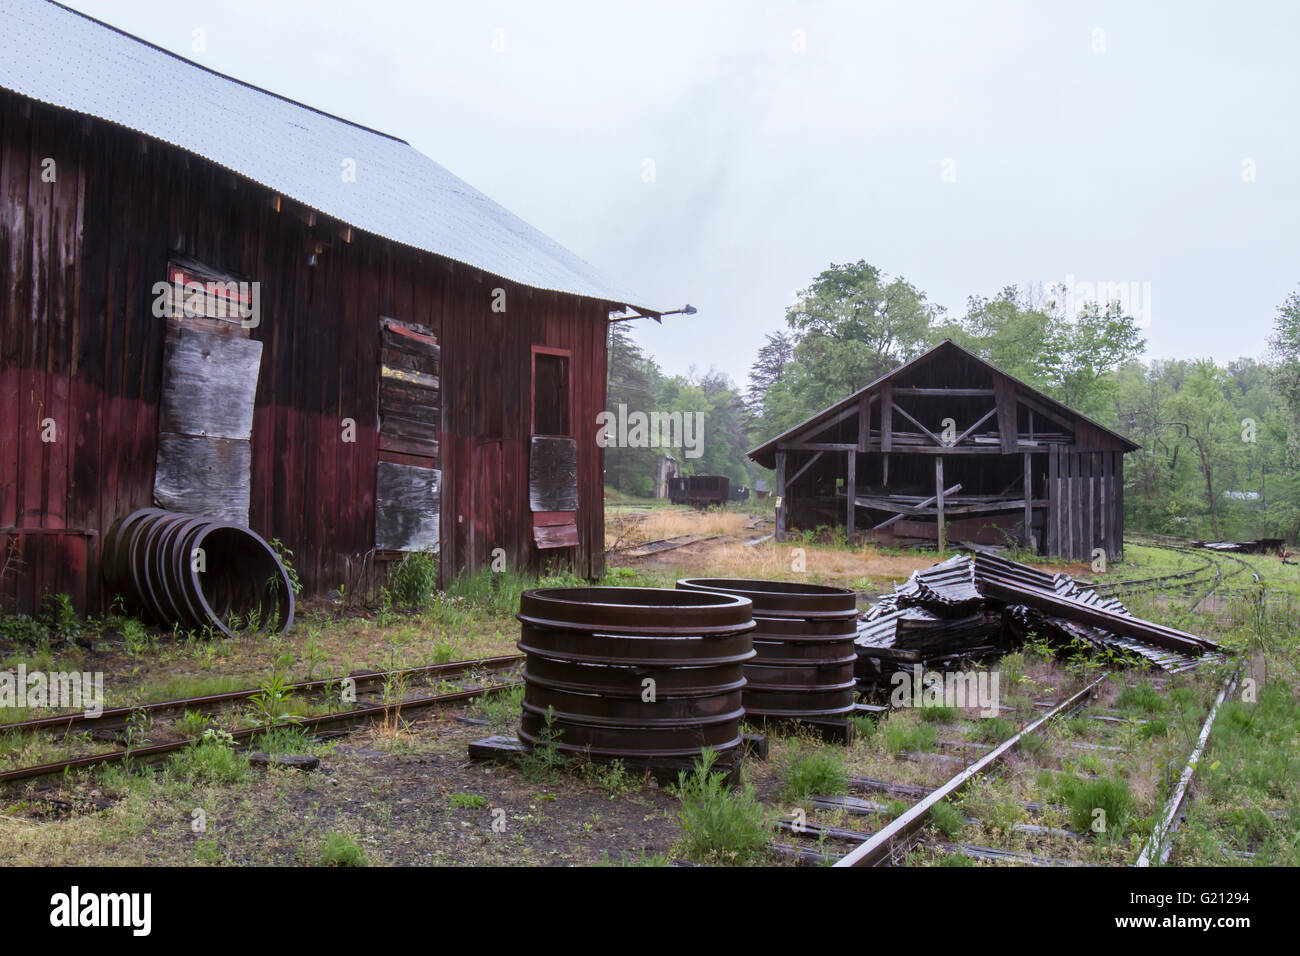 Dilapidated sheds along railroad tracks with rusting train wheels in countryside. Stock Photo